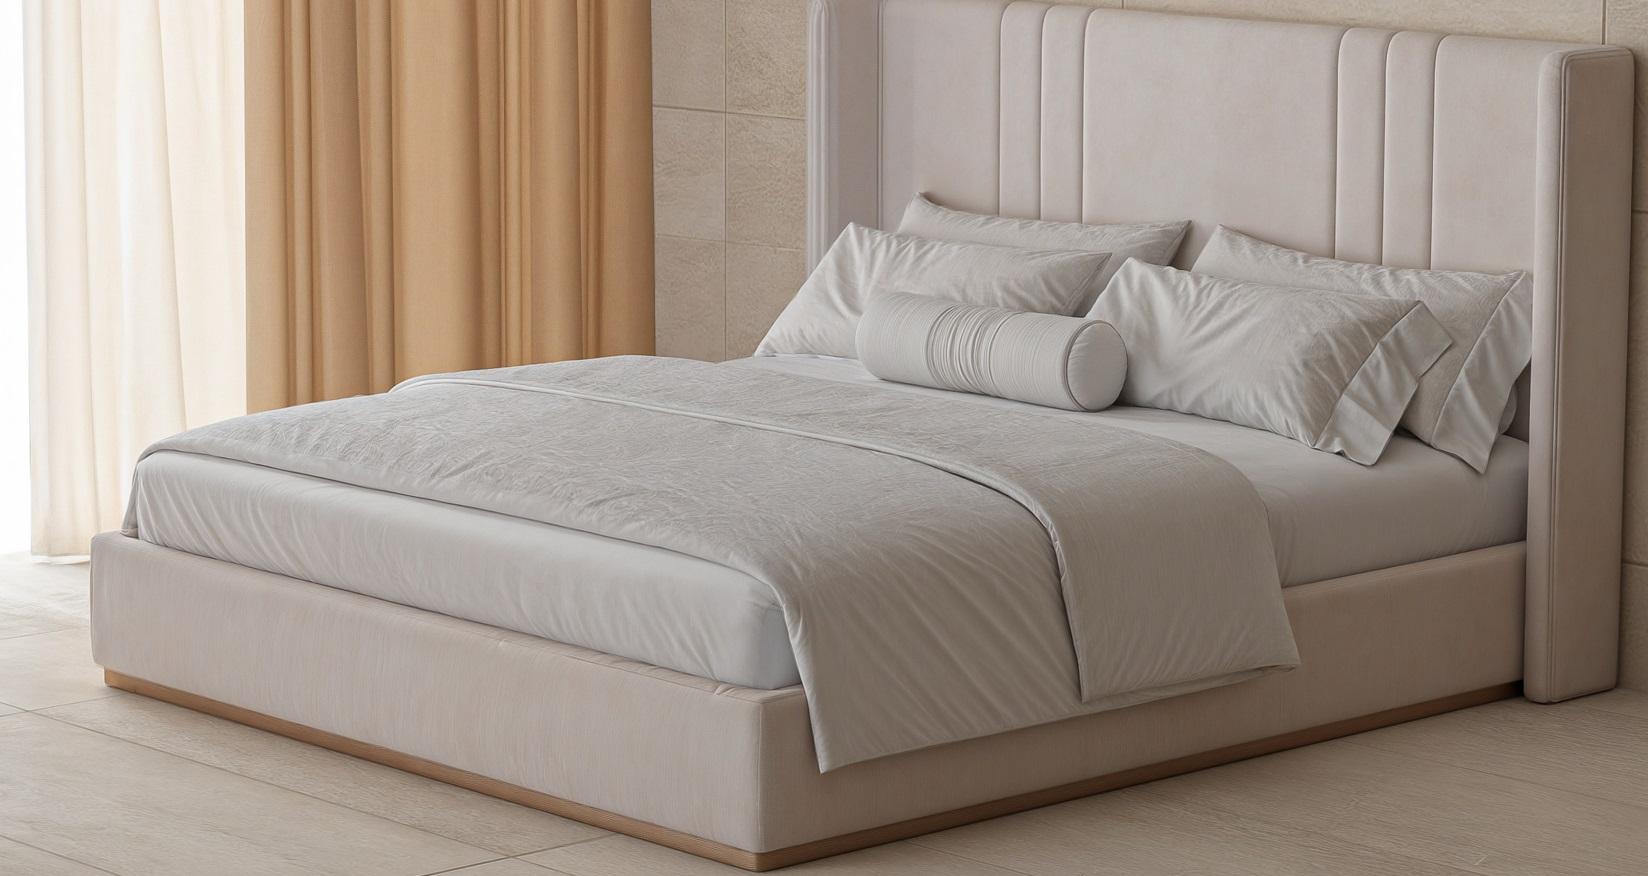 This bed is a leather masterpiece adorned with a headboard boasting stitched detailing in a minimal yet elegant fashion, rendering the bed timeless and seamlessly adaptable to any interior style. Its refined design exudes sophistication, offering a